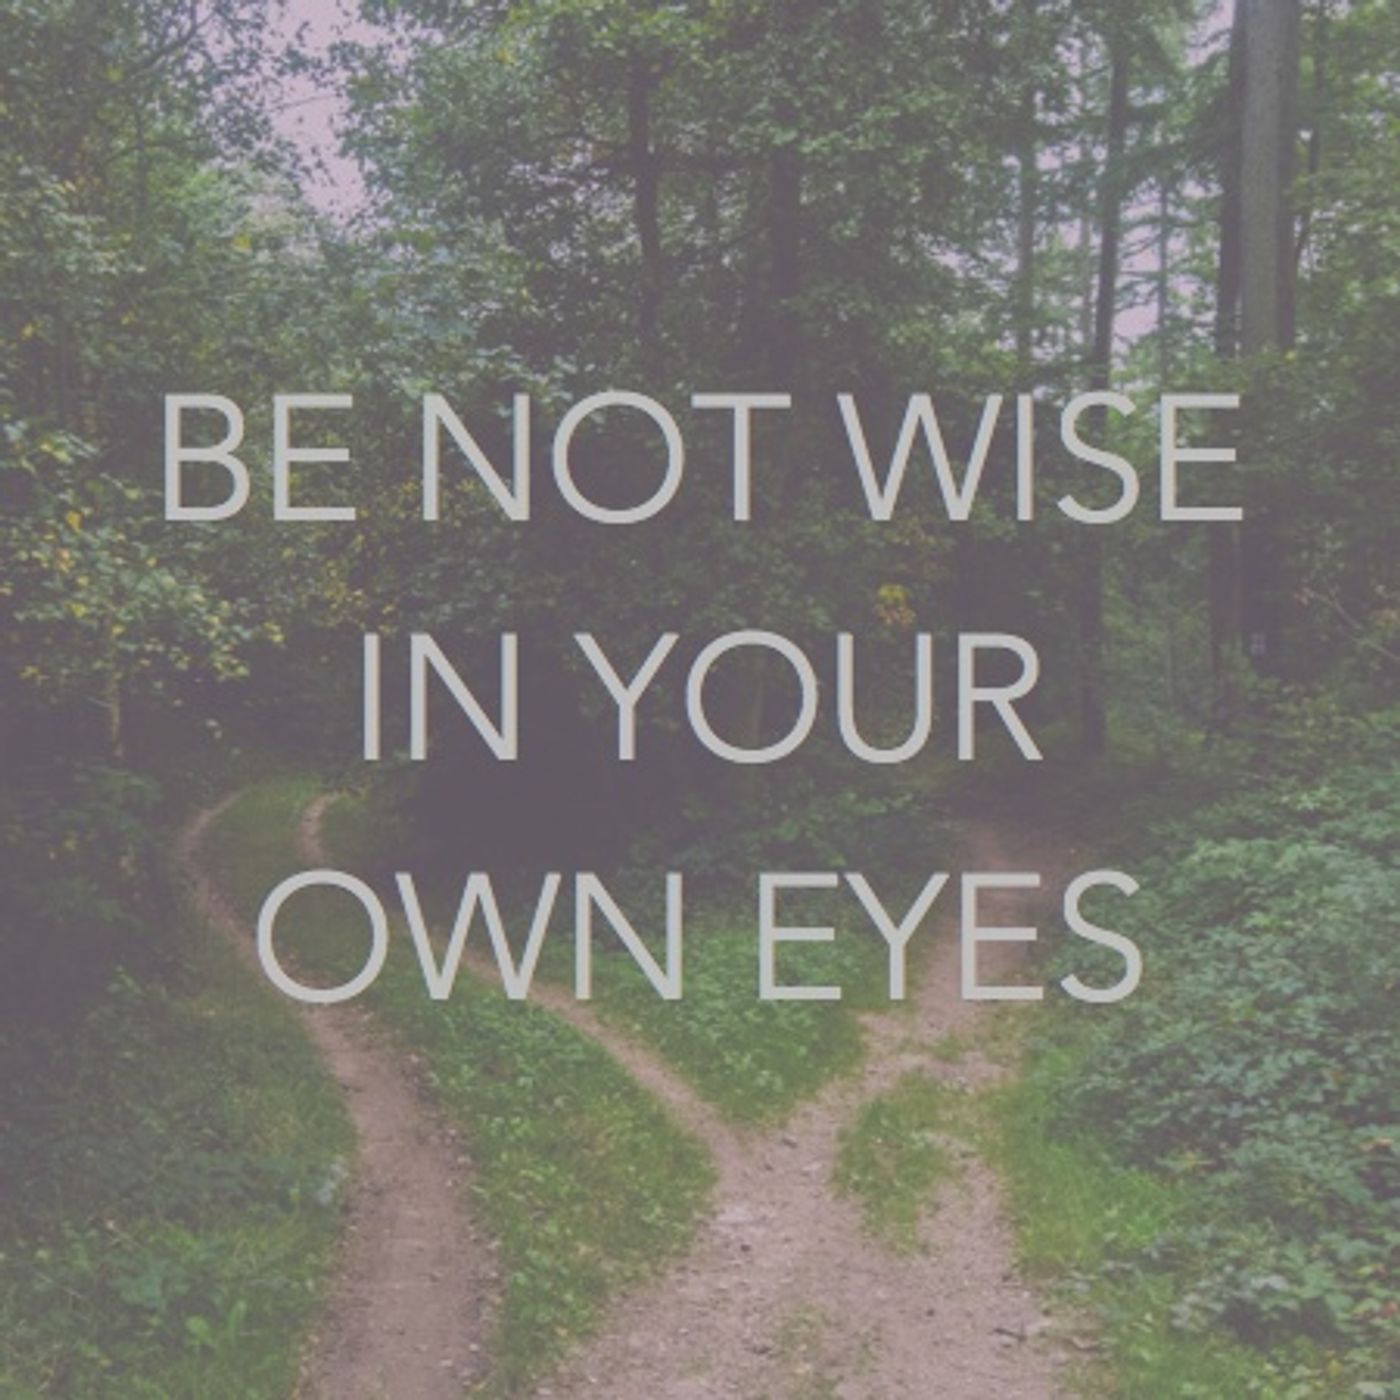 Be Not Wise